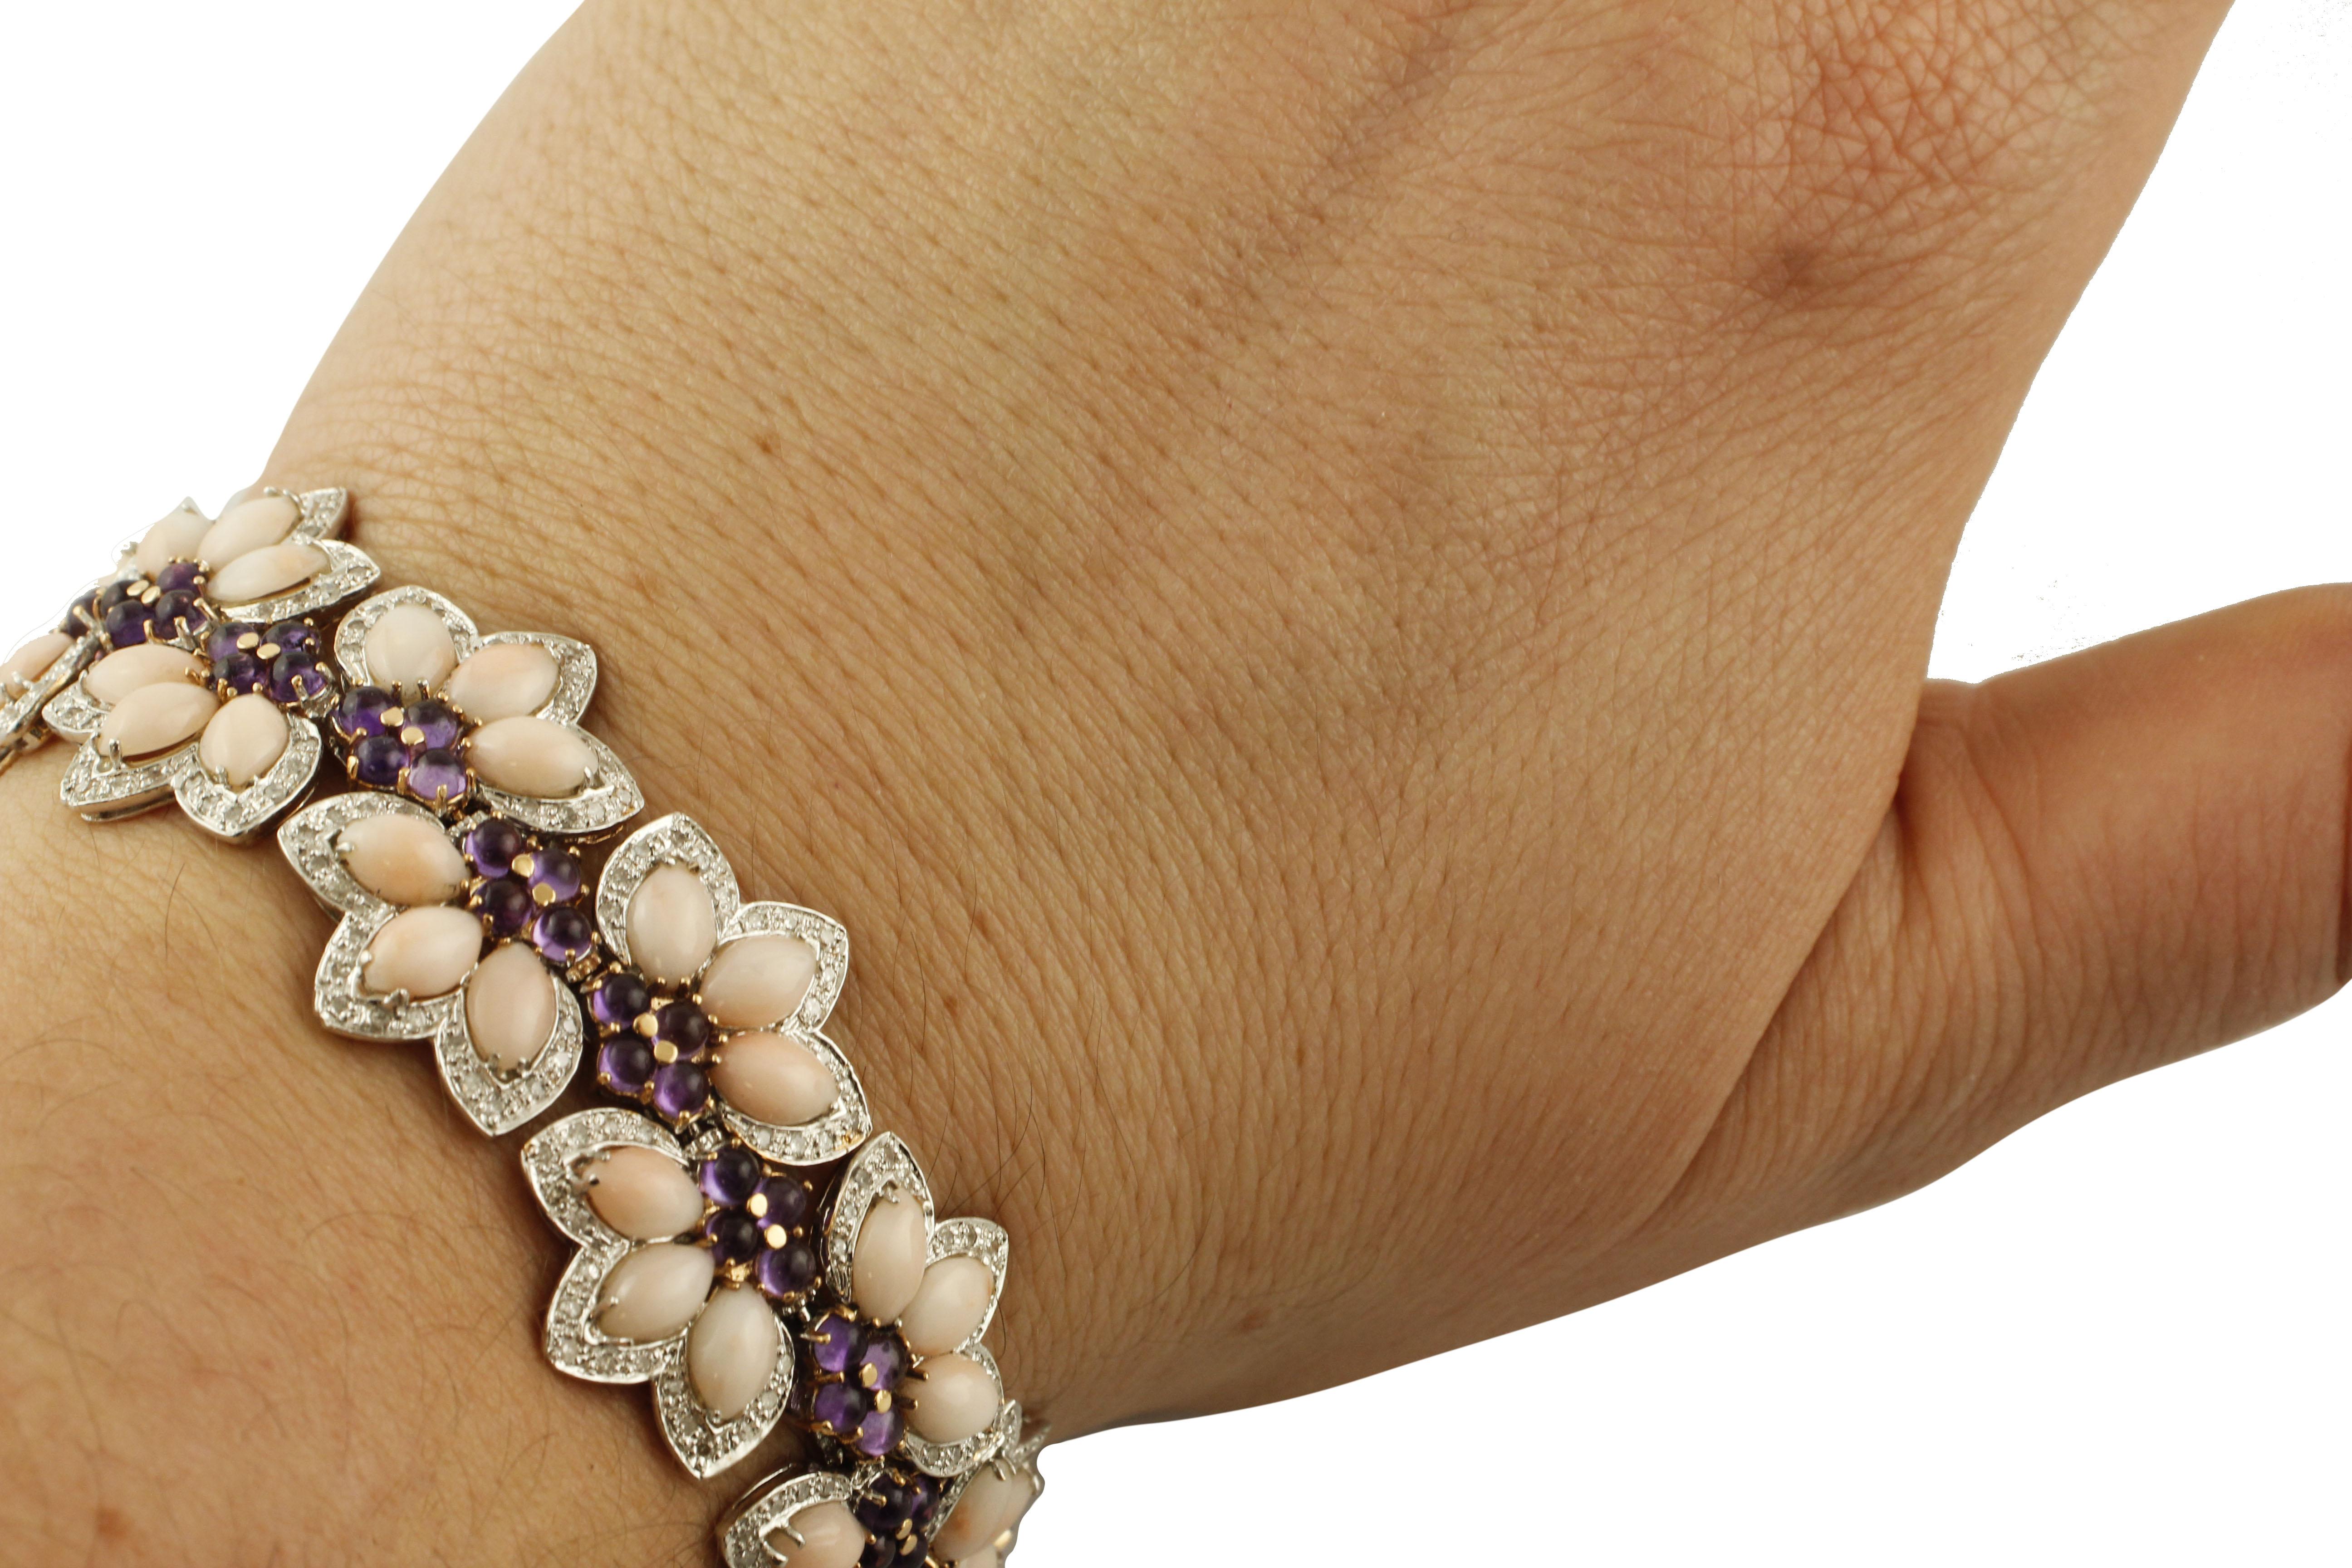 Women's White Diamonds, Amethysts, Pink Coral Drops, White/Rose Gold Flowers Bracelet For Sale